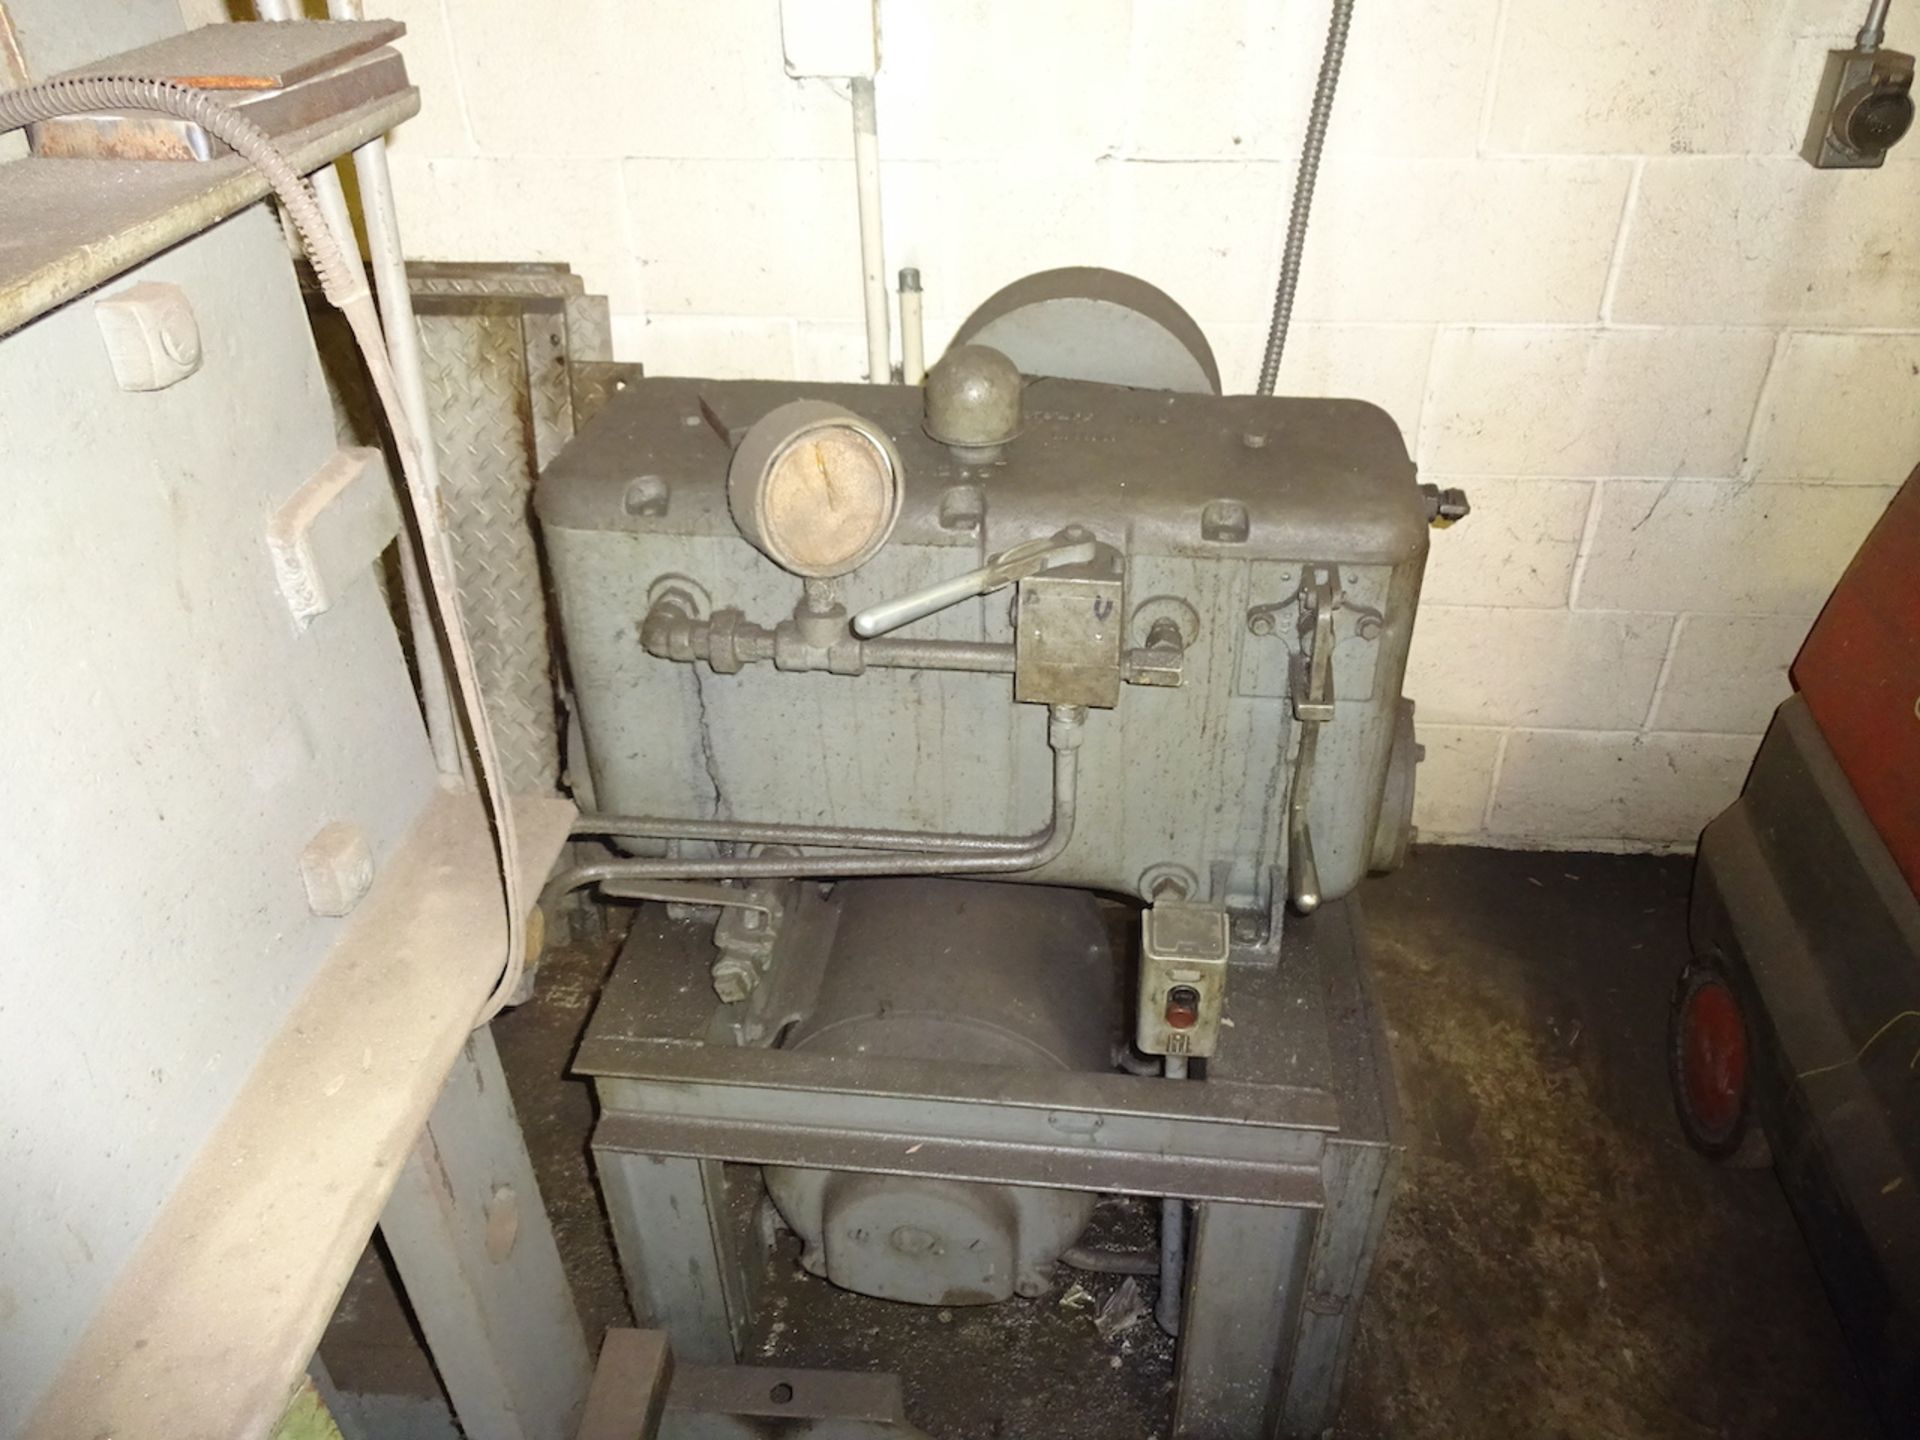 Rodgers Model S 150 14 Adjustable H-Frame Hydraulic Press, S/N S150-1351 - Image 4 of 4